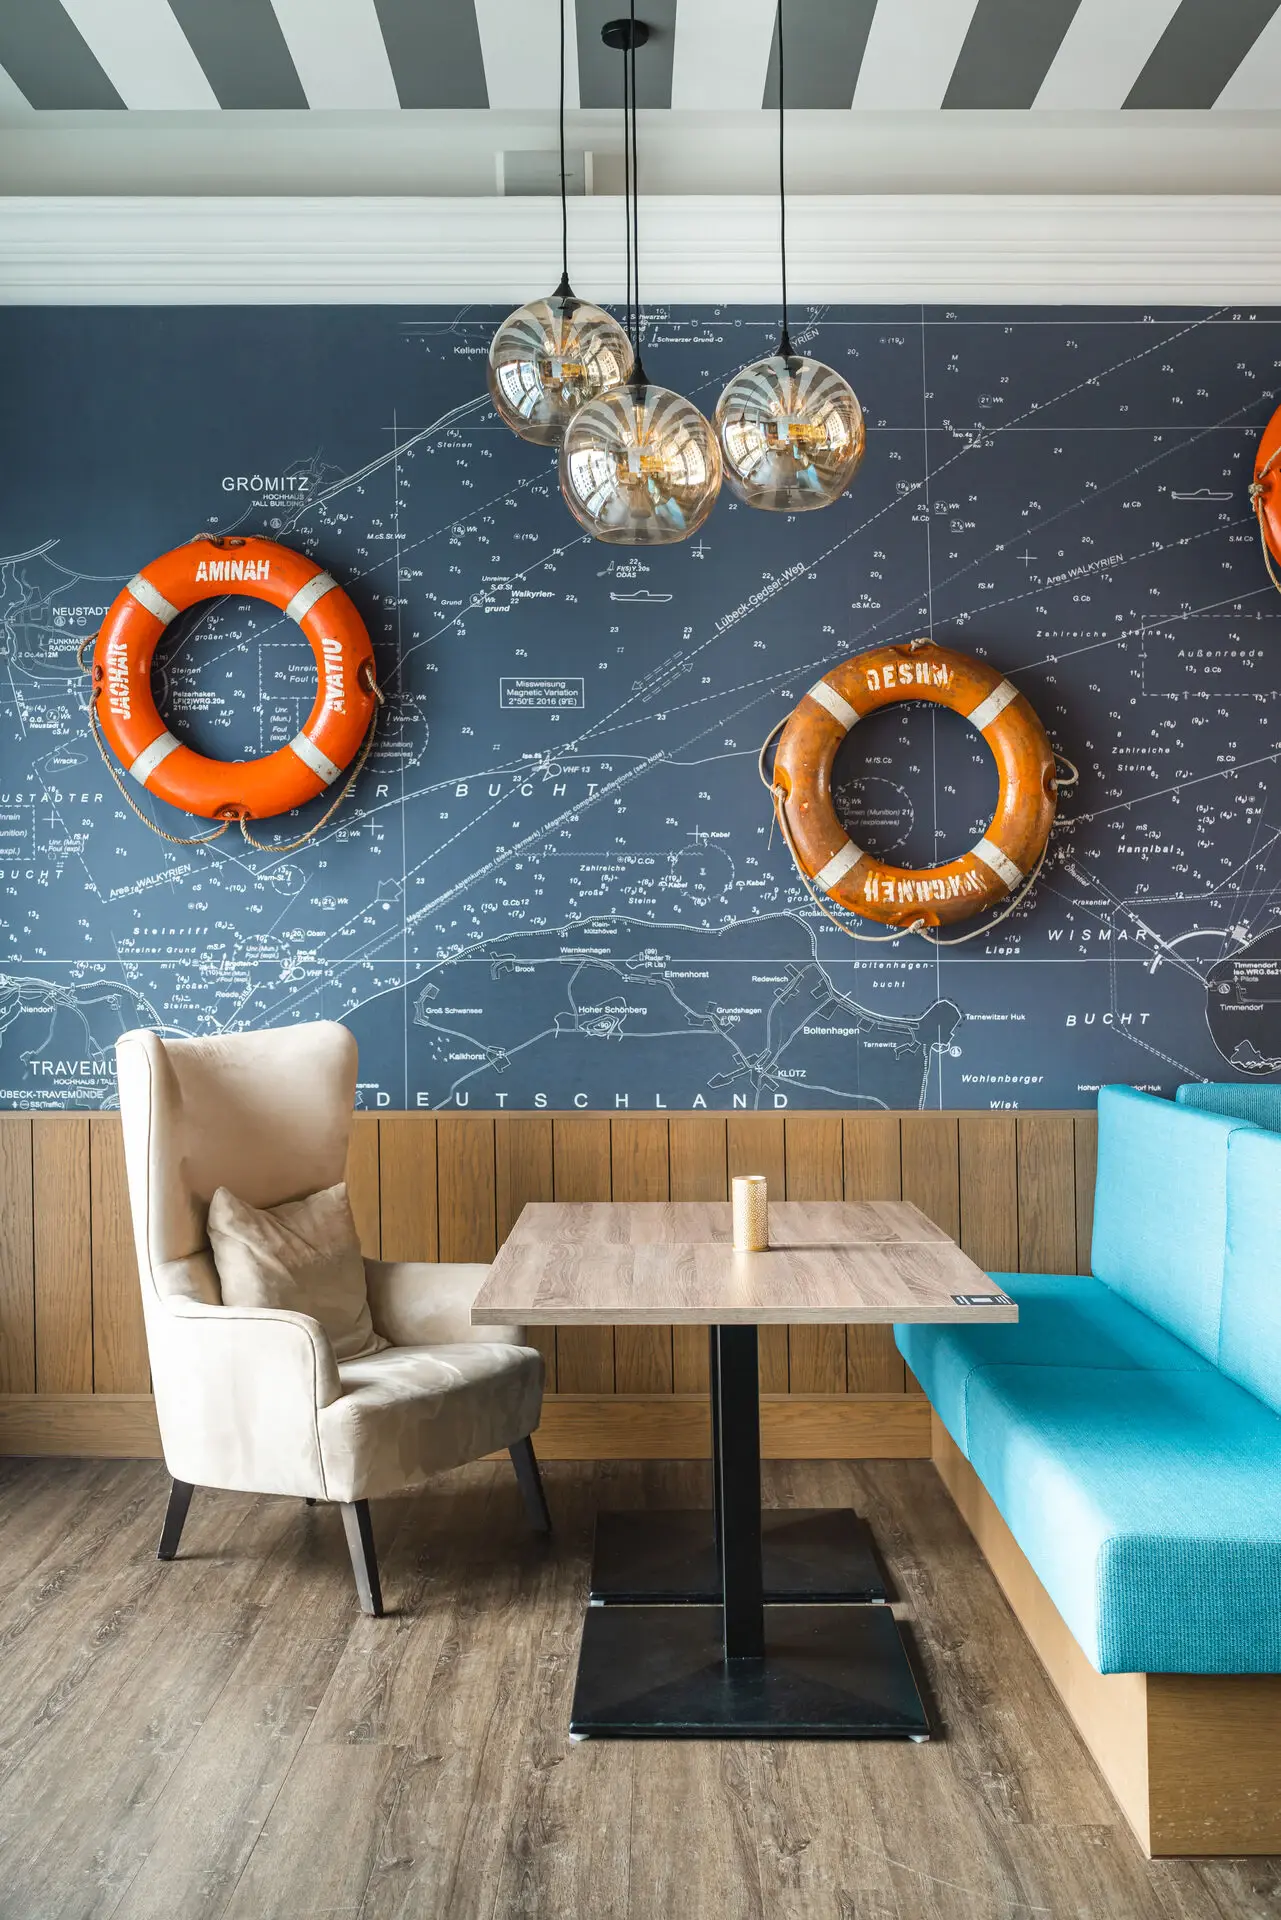 Furnishing featuring a table and chairs, a blue couch, and orange life buoys hung on the wall.